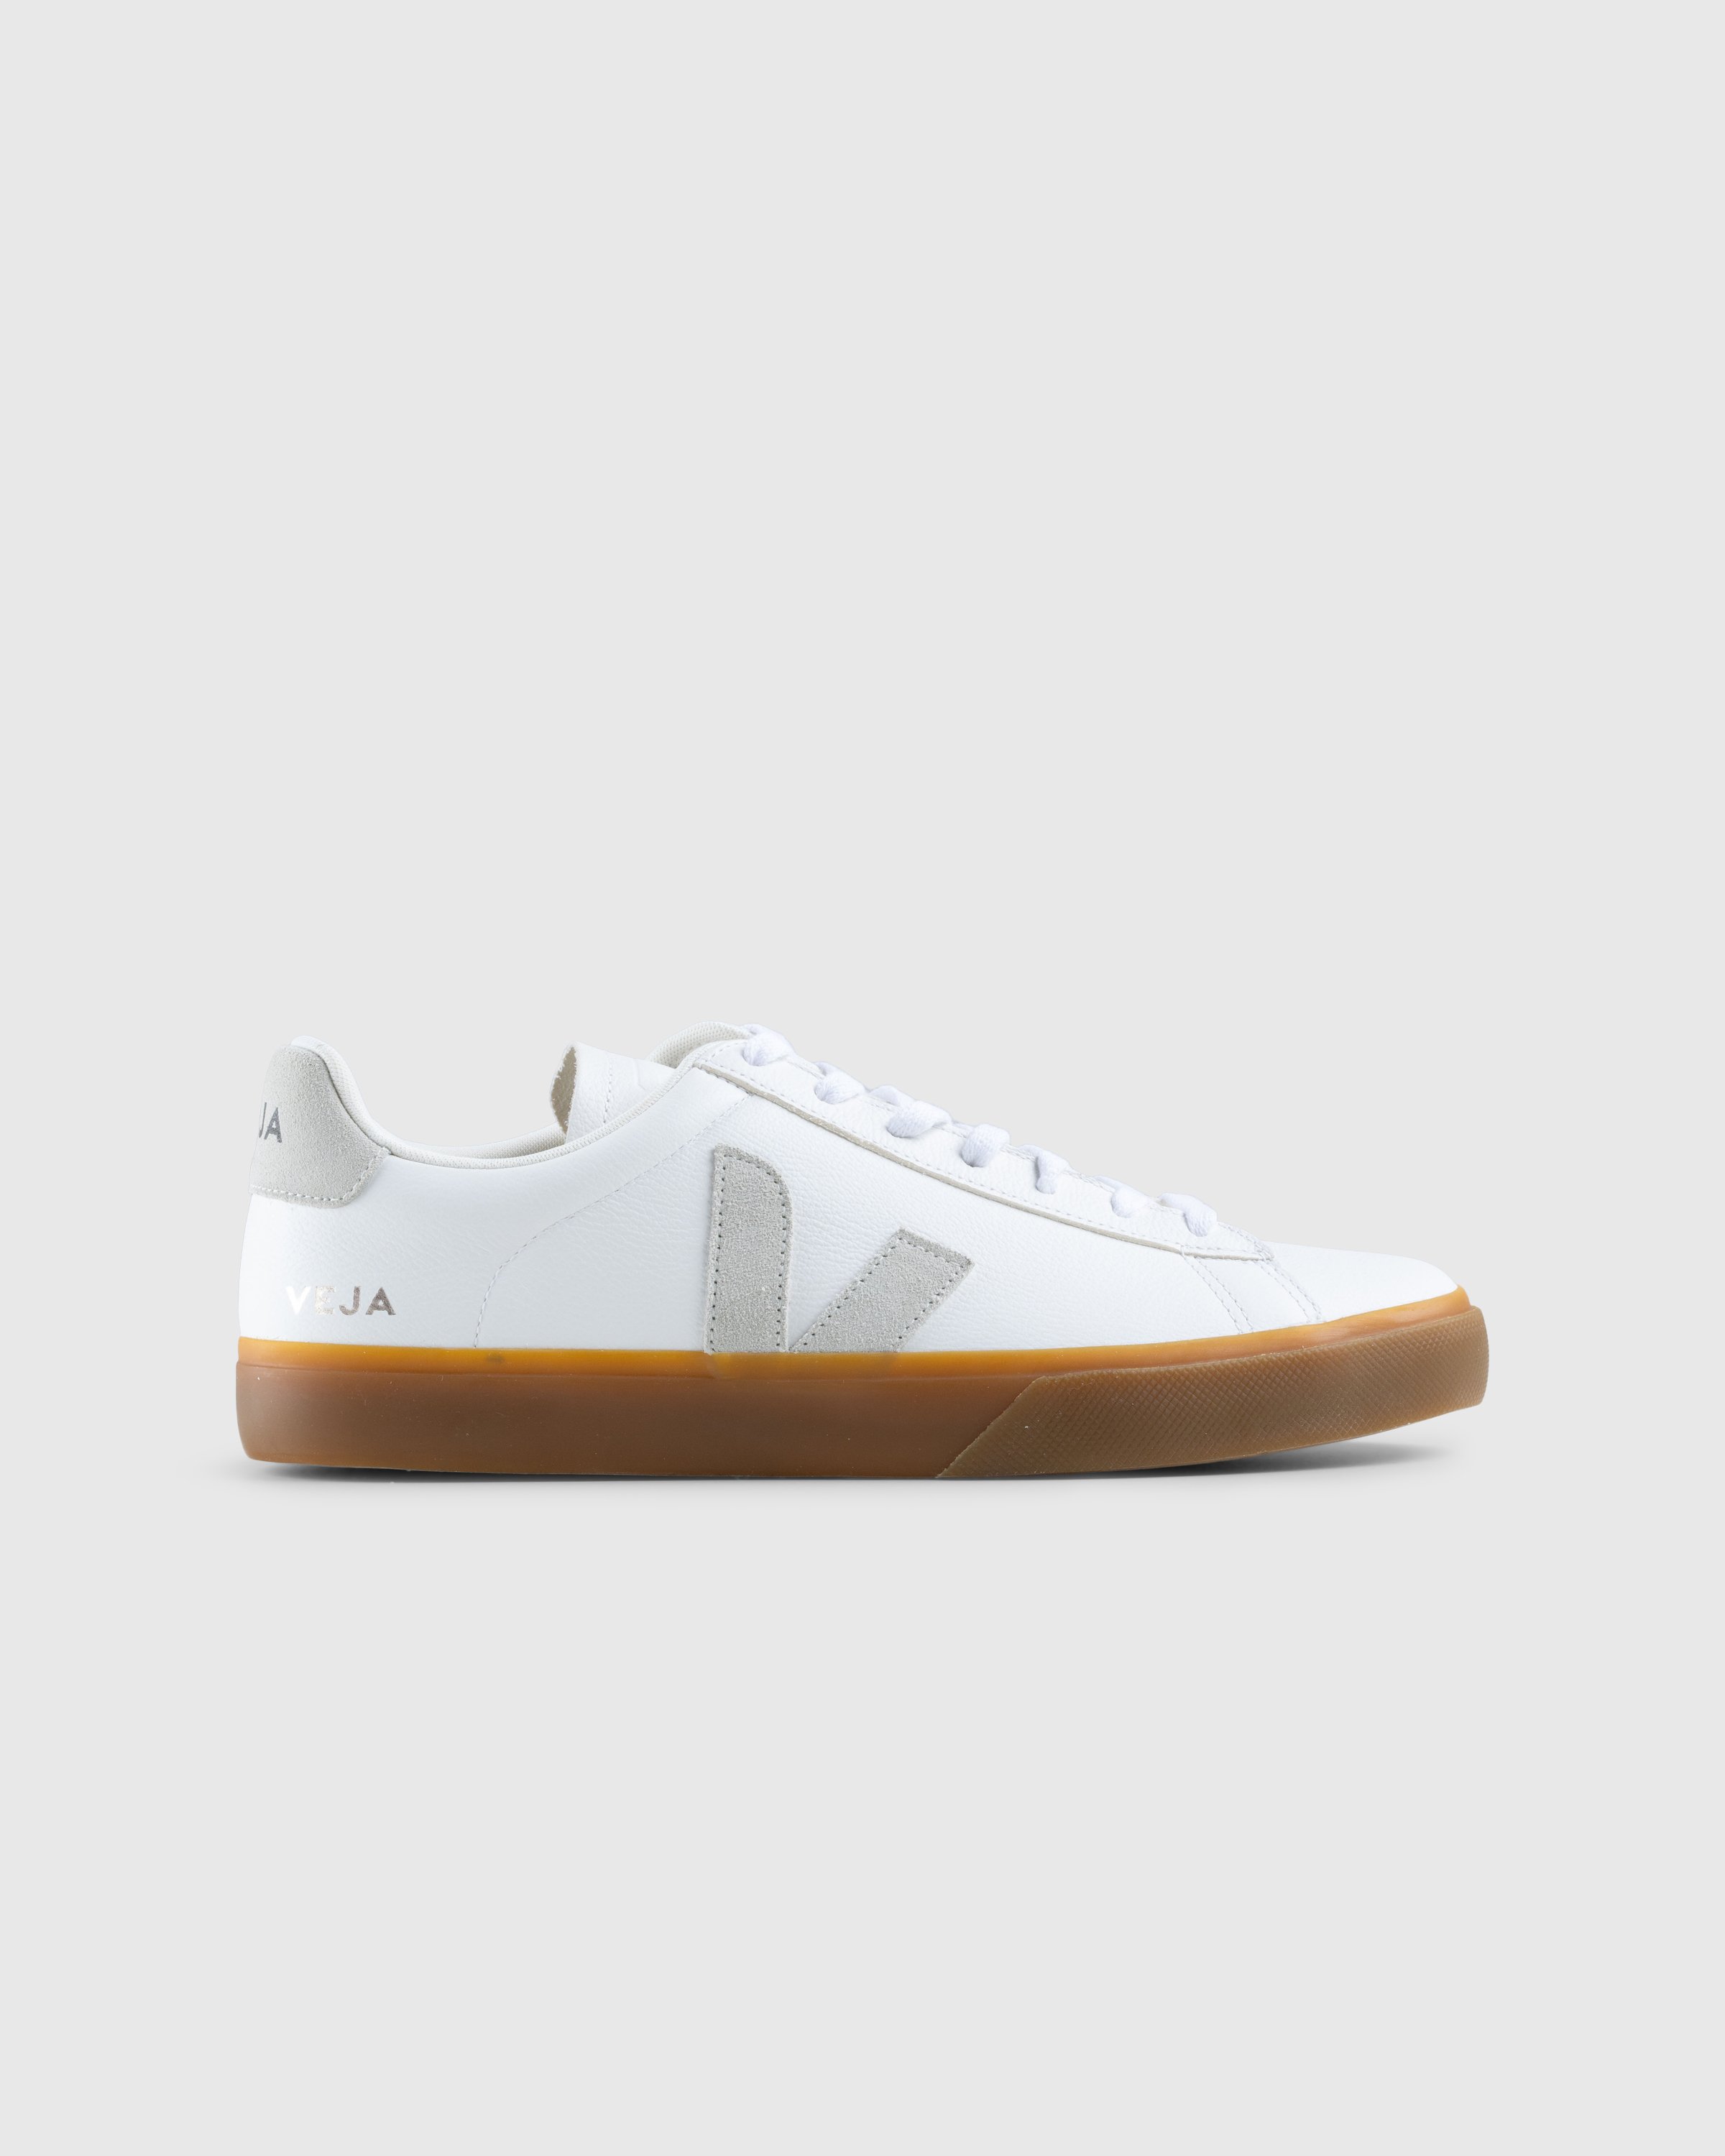 VEJA - Campo White/Natural - Footwear - White - Image 1